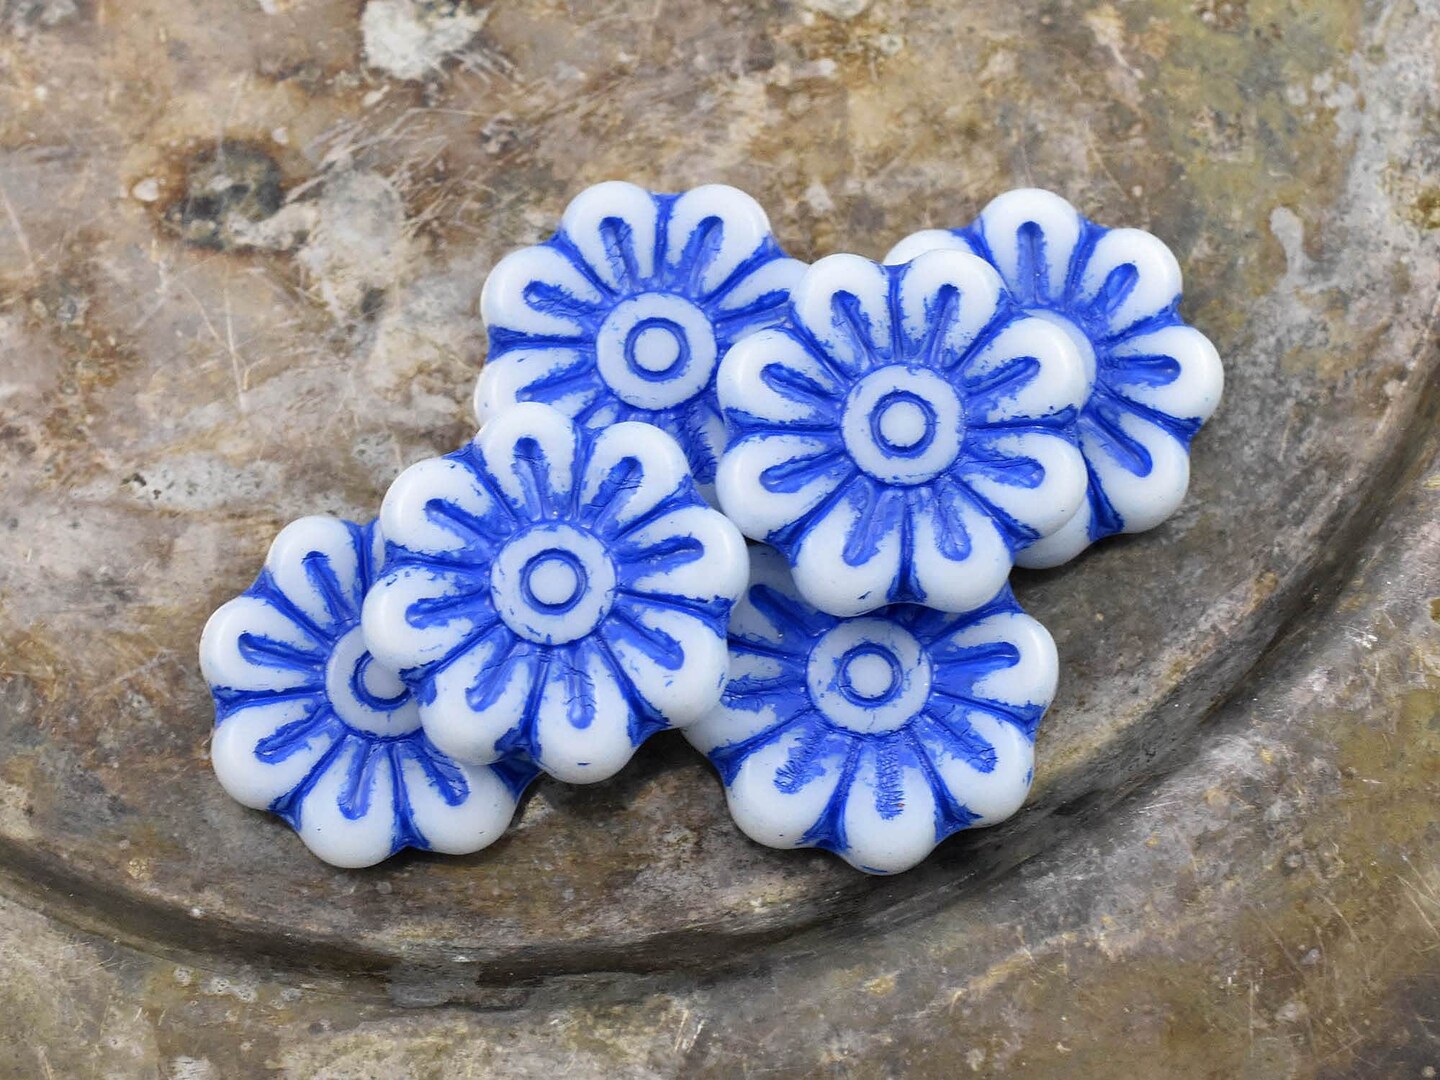 *6* 18mm Blue Washed Opaque White Daisy Flower Beads